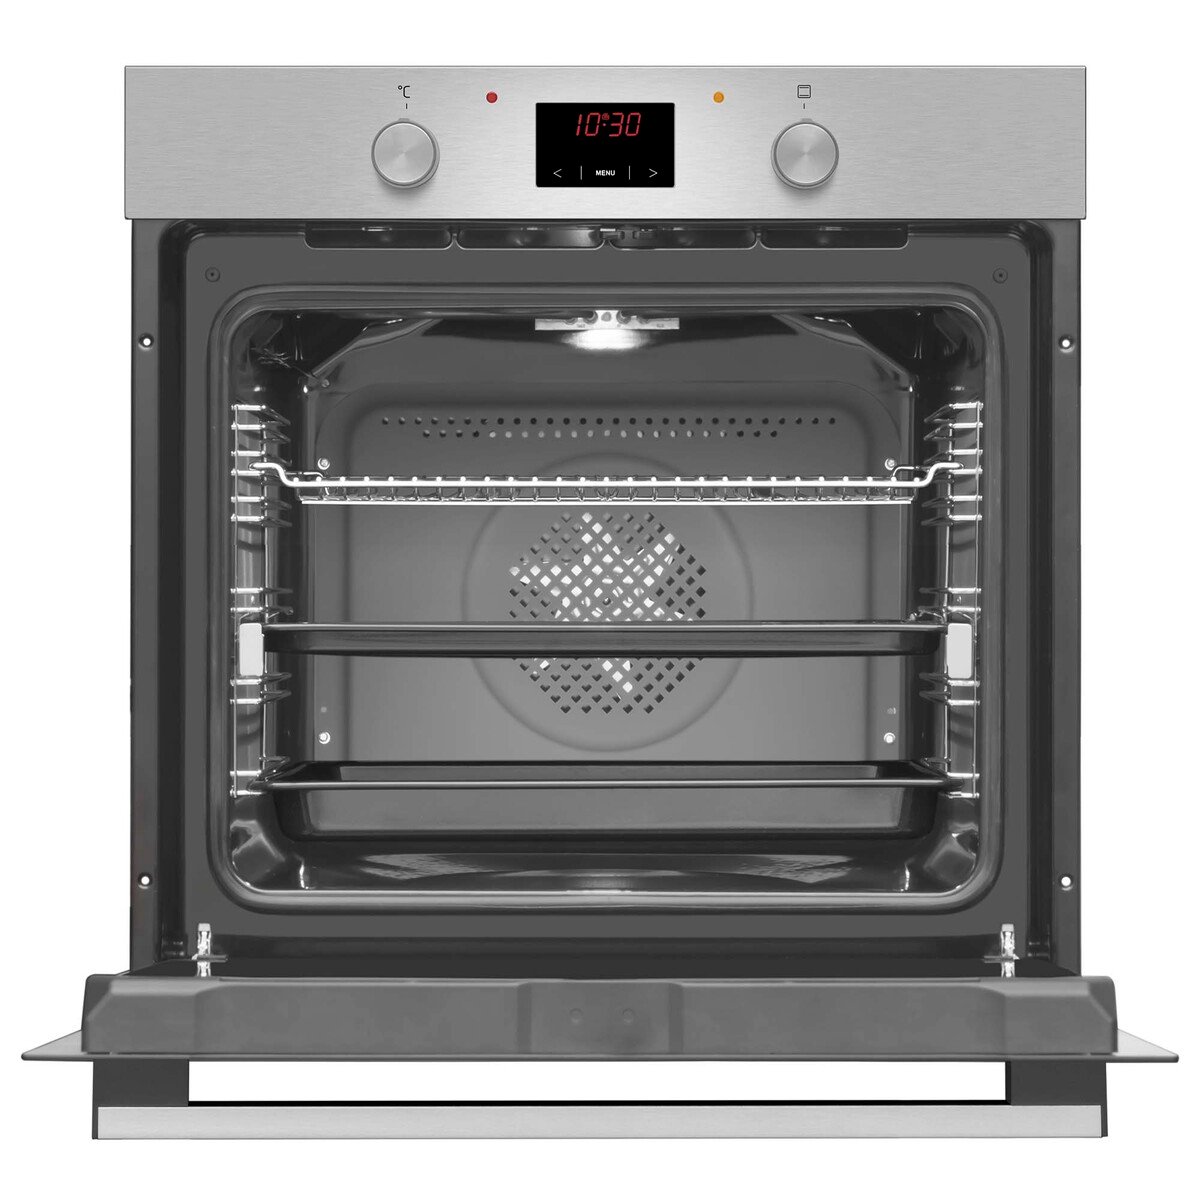 Fagor Built-in Electric Oven OE-350X 77LTR